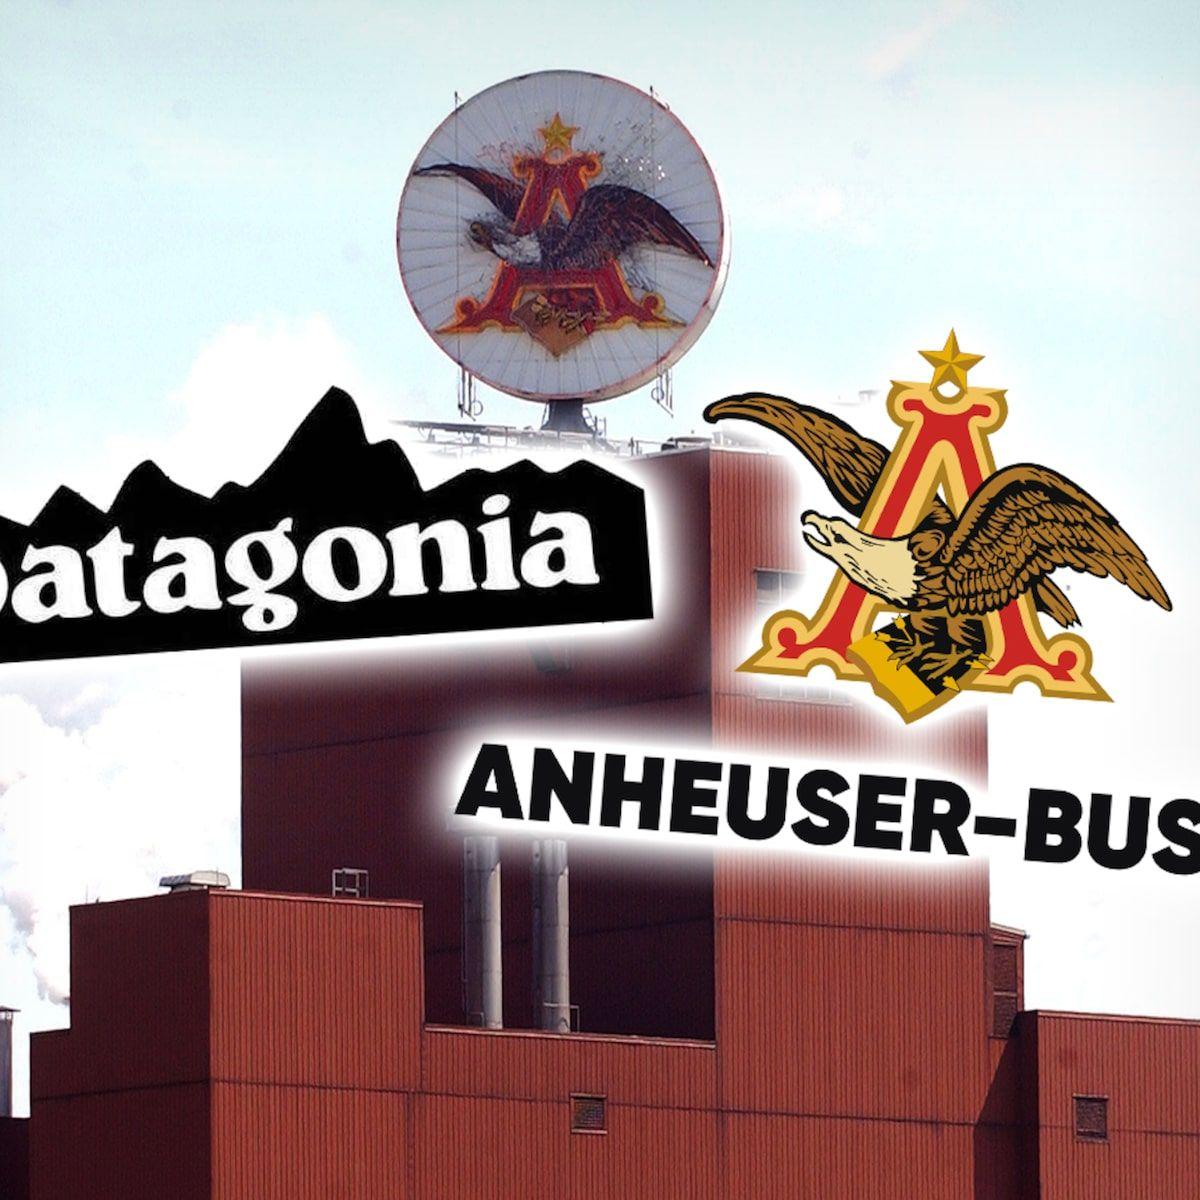 Anheuser-Busch Logo - Patagonia Sues Anheuser Busch For Putting Its Name On New Beer